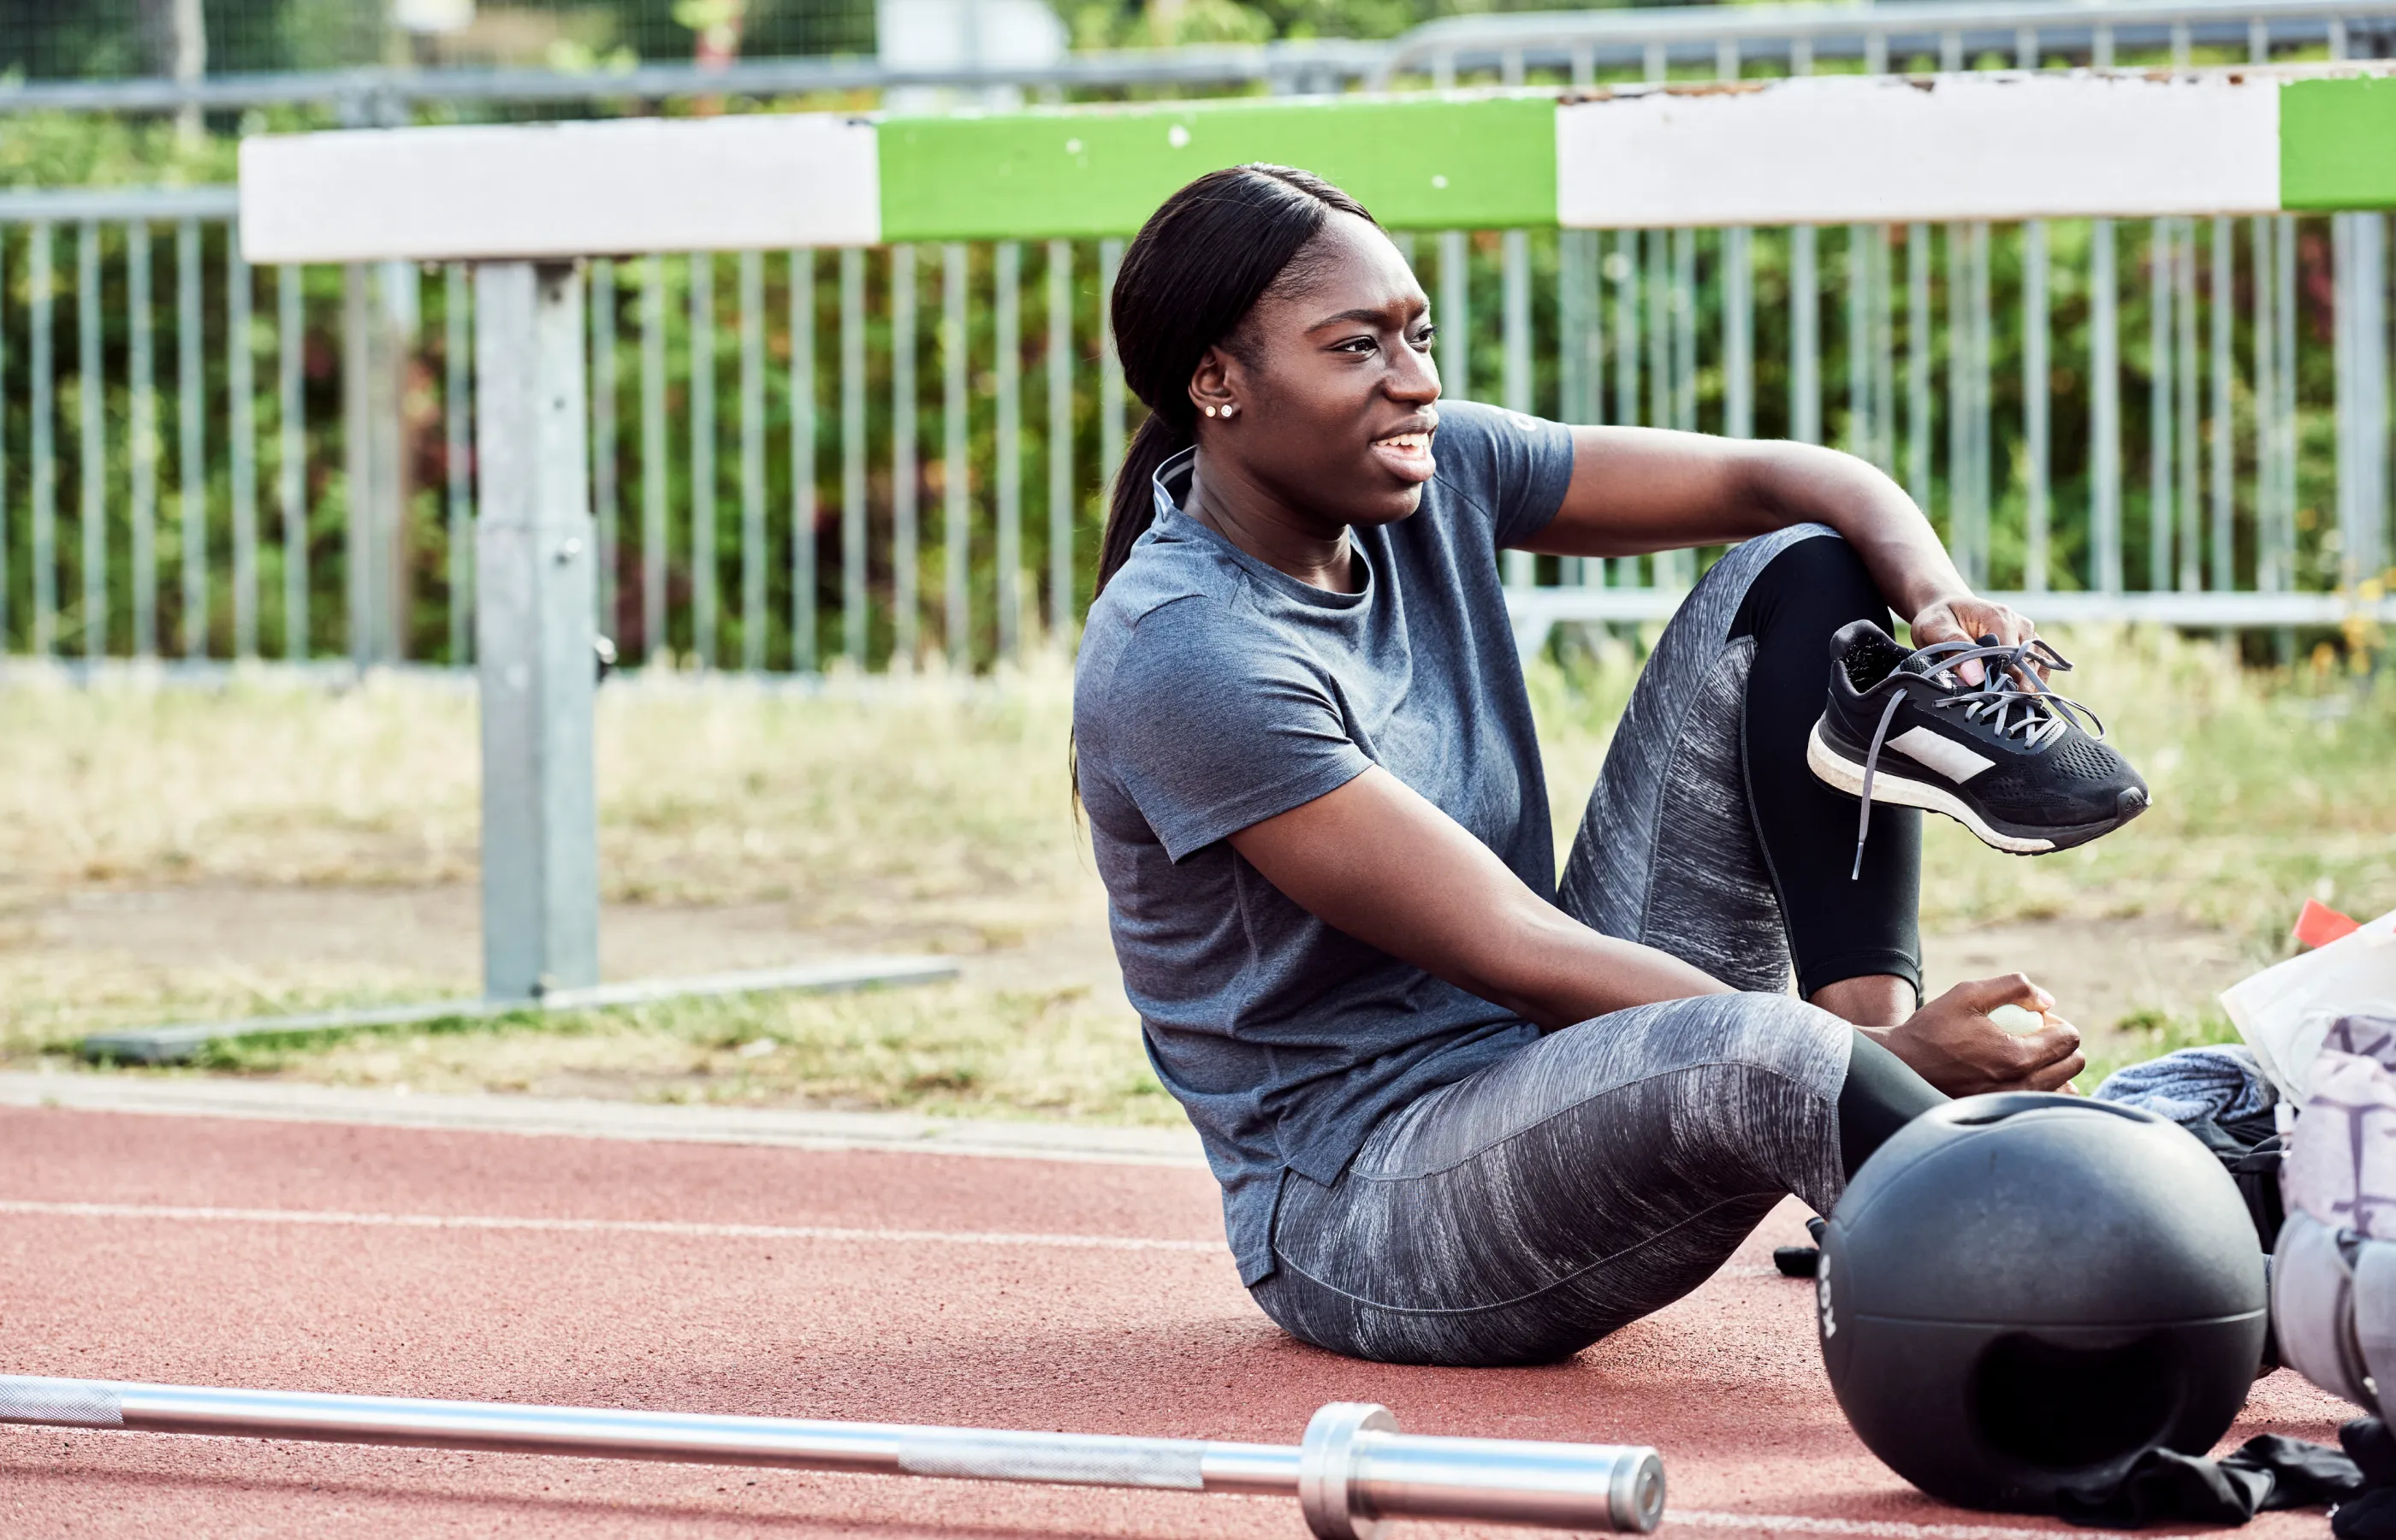 Athletic woman sitting on a track putting her shoes on to get ready for running.